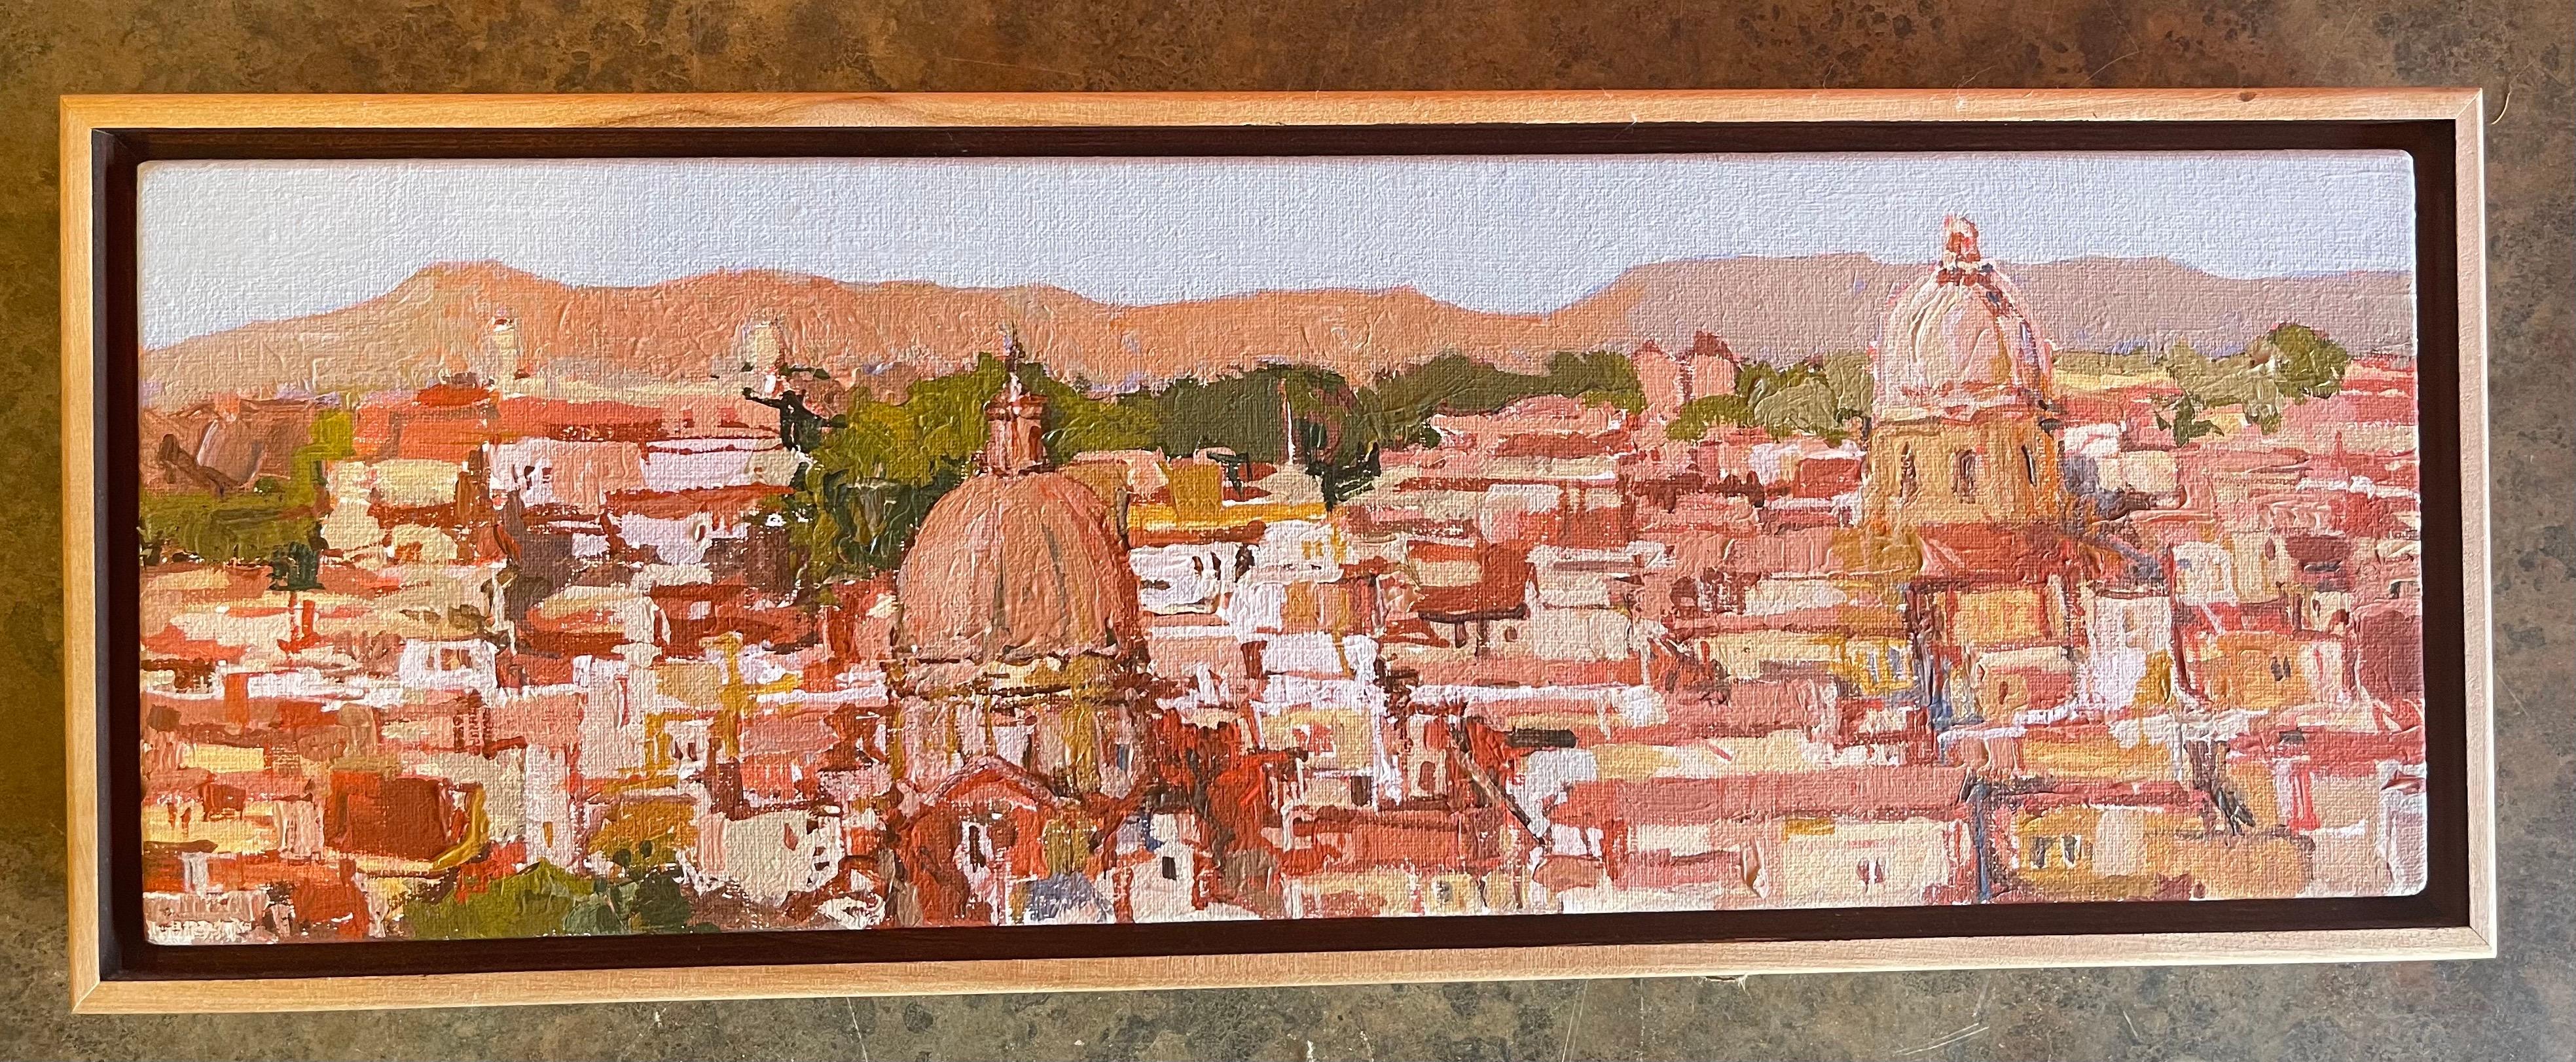 Oil on canvas cityscape painting of Rome, Italy by listed artist Douglas Atwill, circa 1990s. The piece has a photo quality about it in addition to wonderful shadowing. It is presented in a rustic natural wood frame and measures 8.5